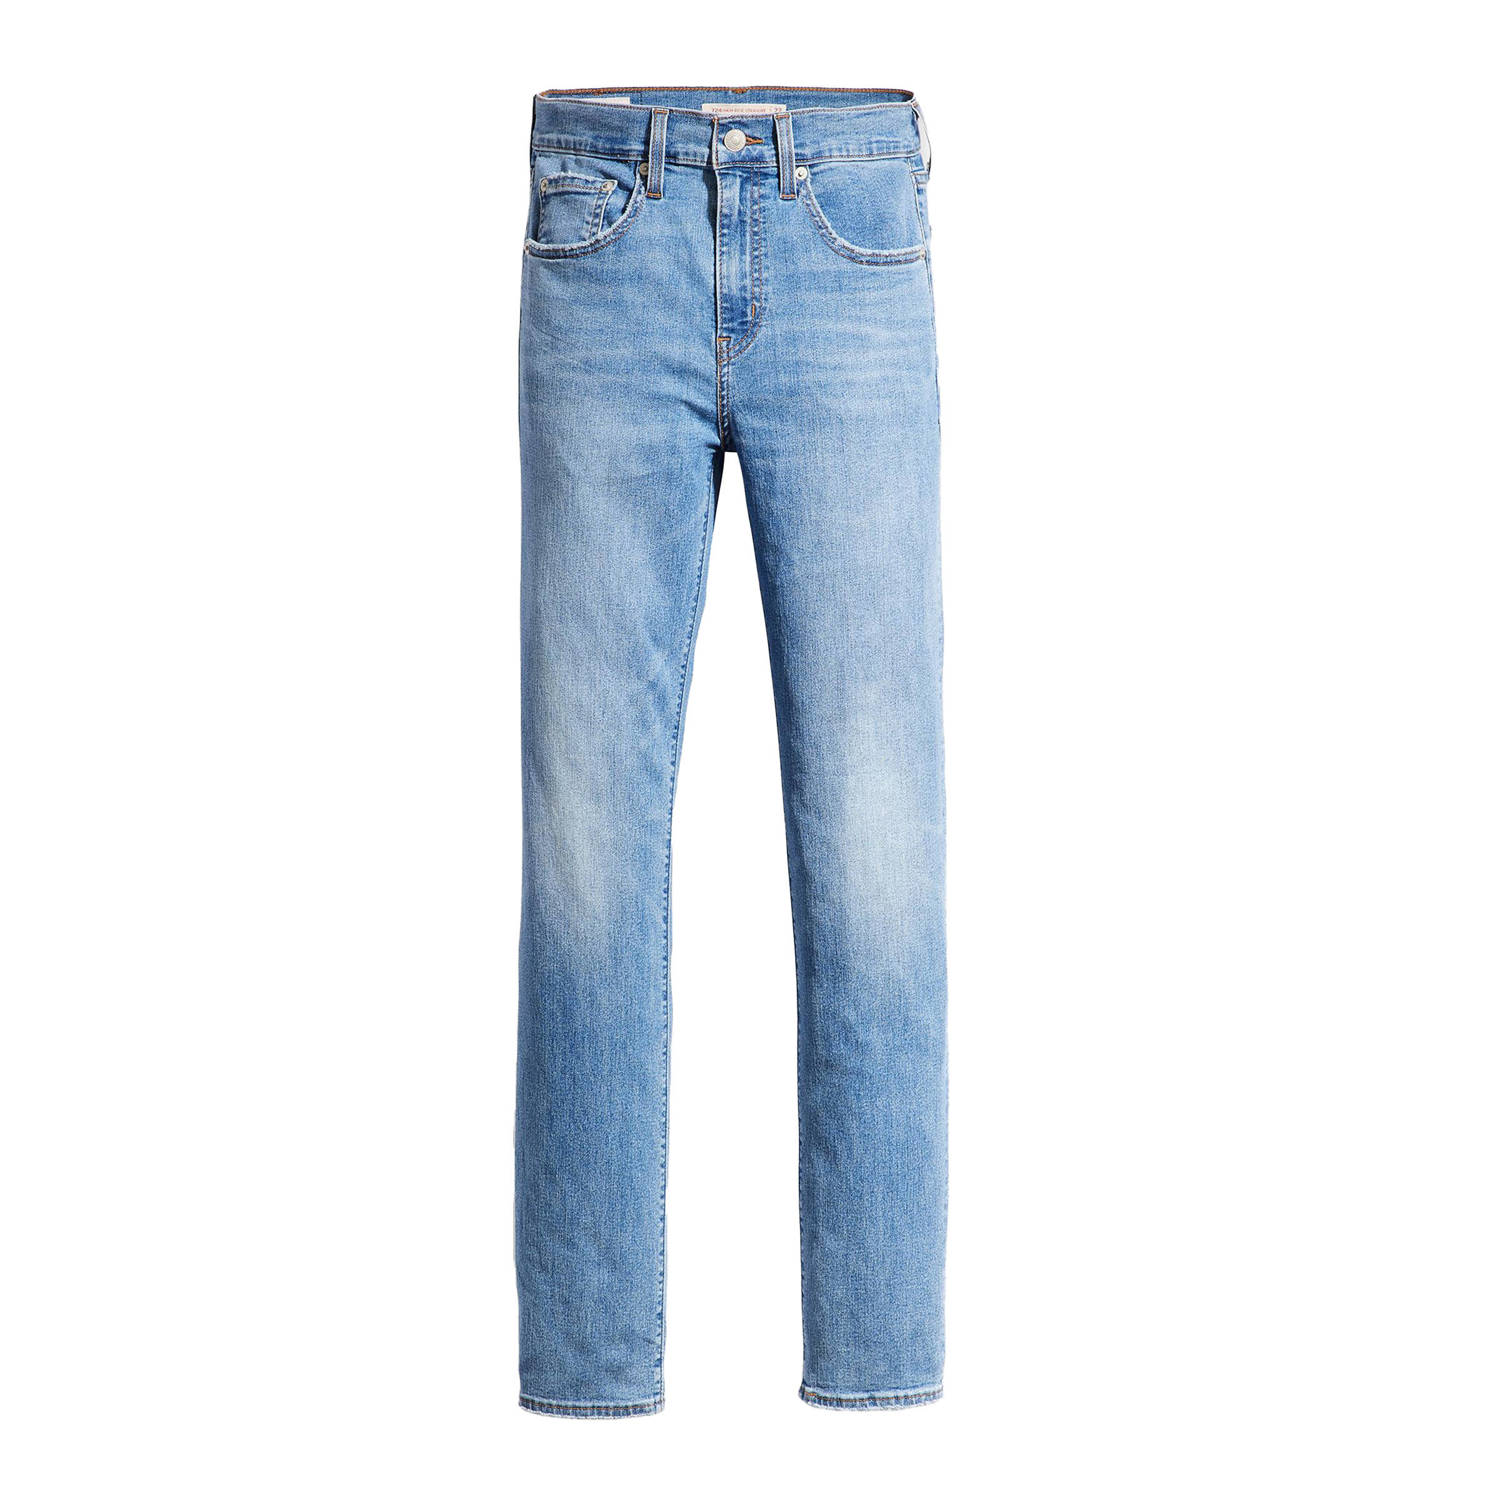 Levi's Straight Jeans Levis 724 HIGH RISE STRAIGHT Lightweight